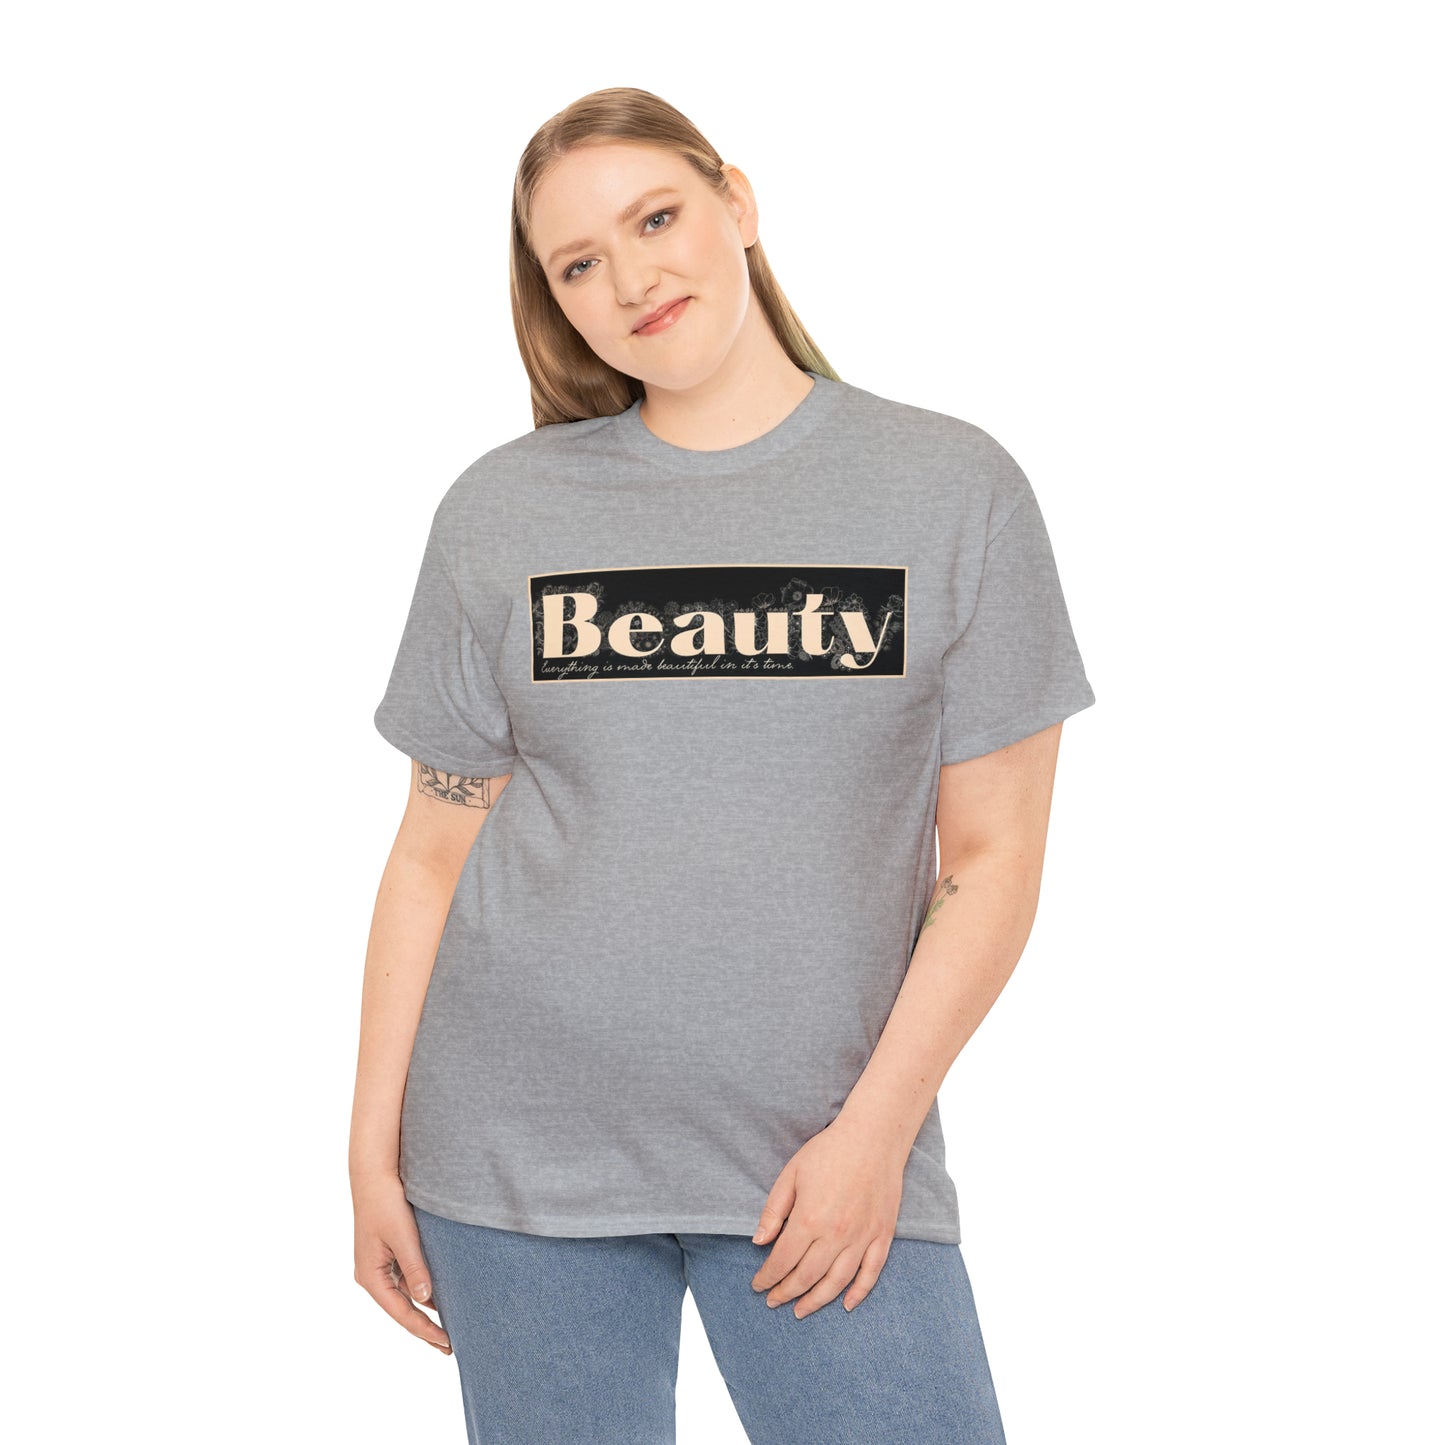 "Beauty" Cotton Graphic Tee - Everything Black & Creamed Honey